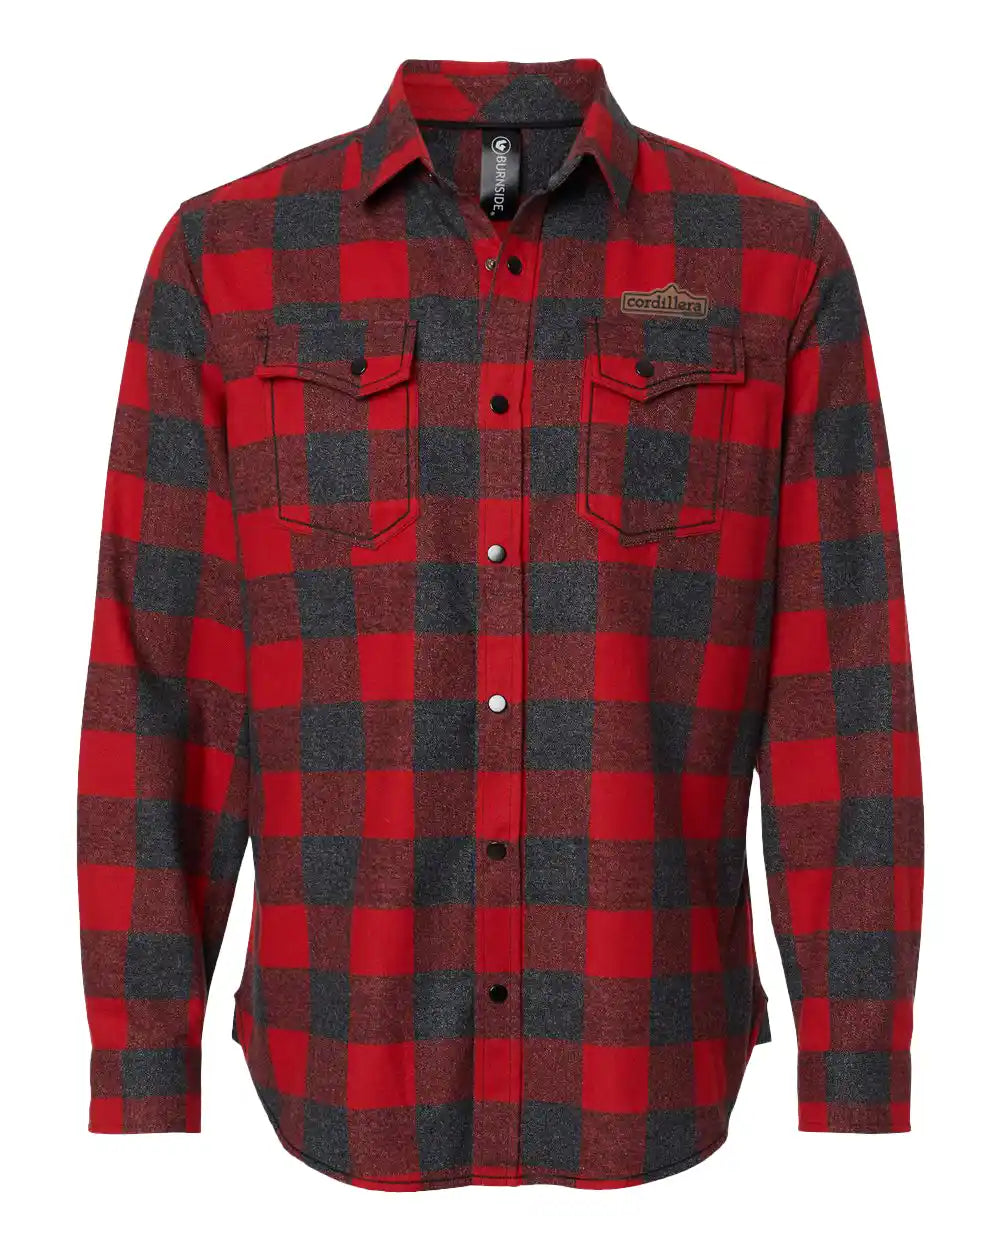 Red and black mens and unisex flannel for winter and chilly weather outside with leather patch